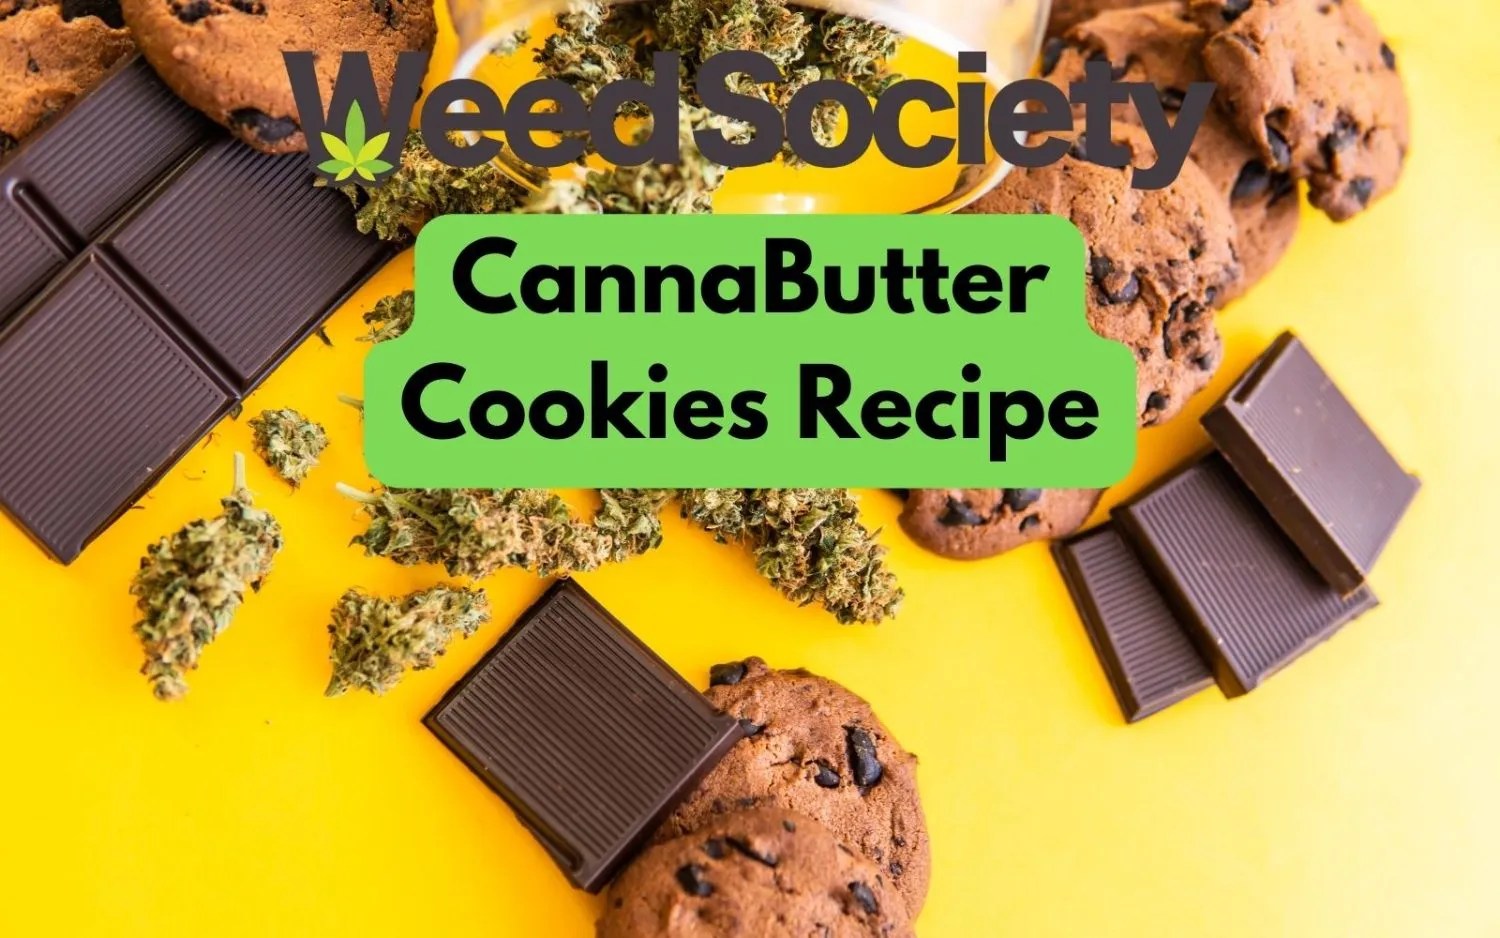 How to Make Cannabutter Cookies: A Step-by-Step Guide | WeedSociety